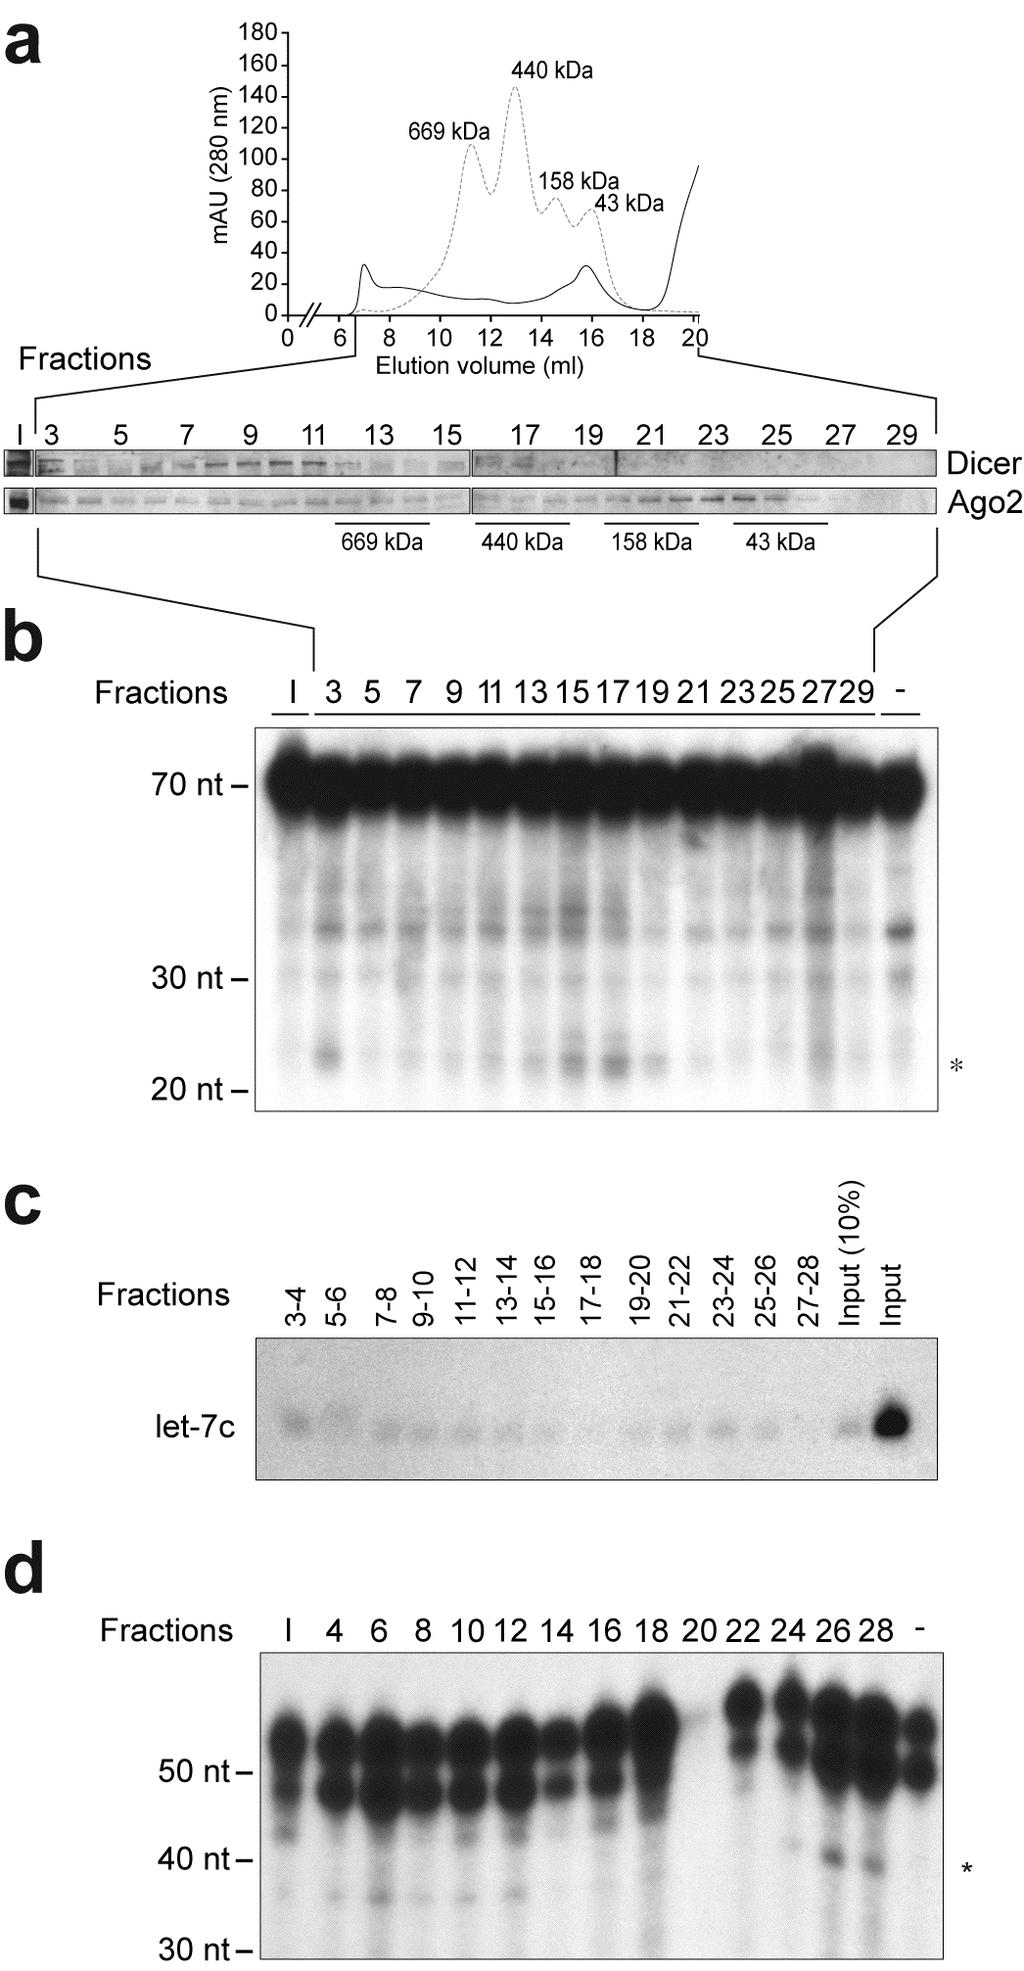 Supplementary Figure 8. Characterization of a Dicer complex active in mirna biosynthesis and of an Ago2-containing effector complex competent in RNA silencing in HeLa cells.